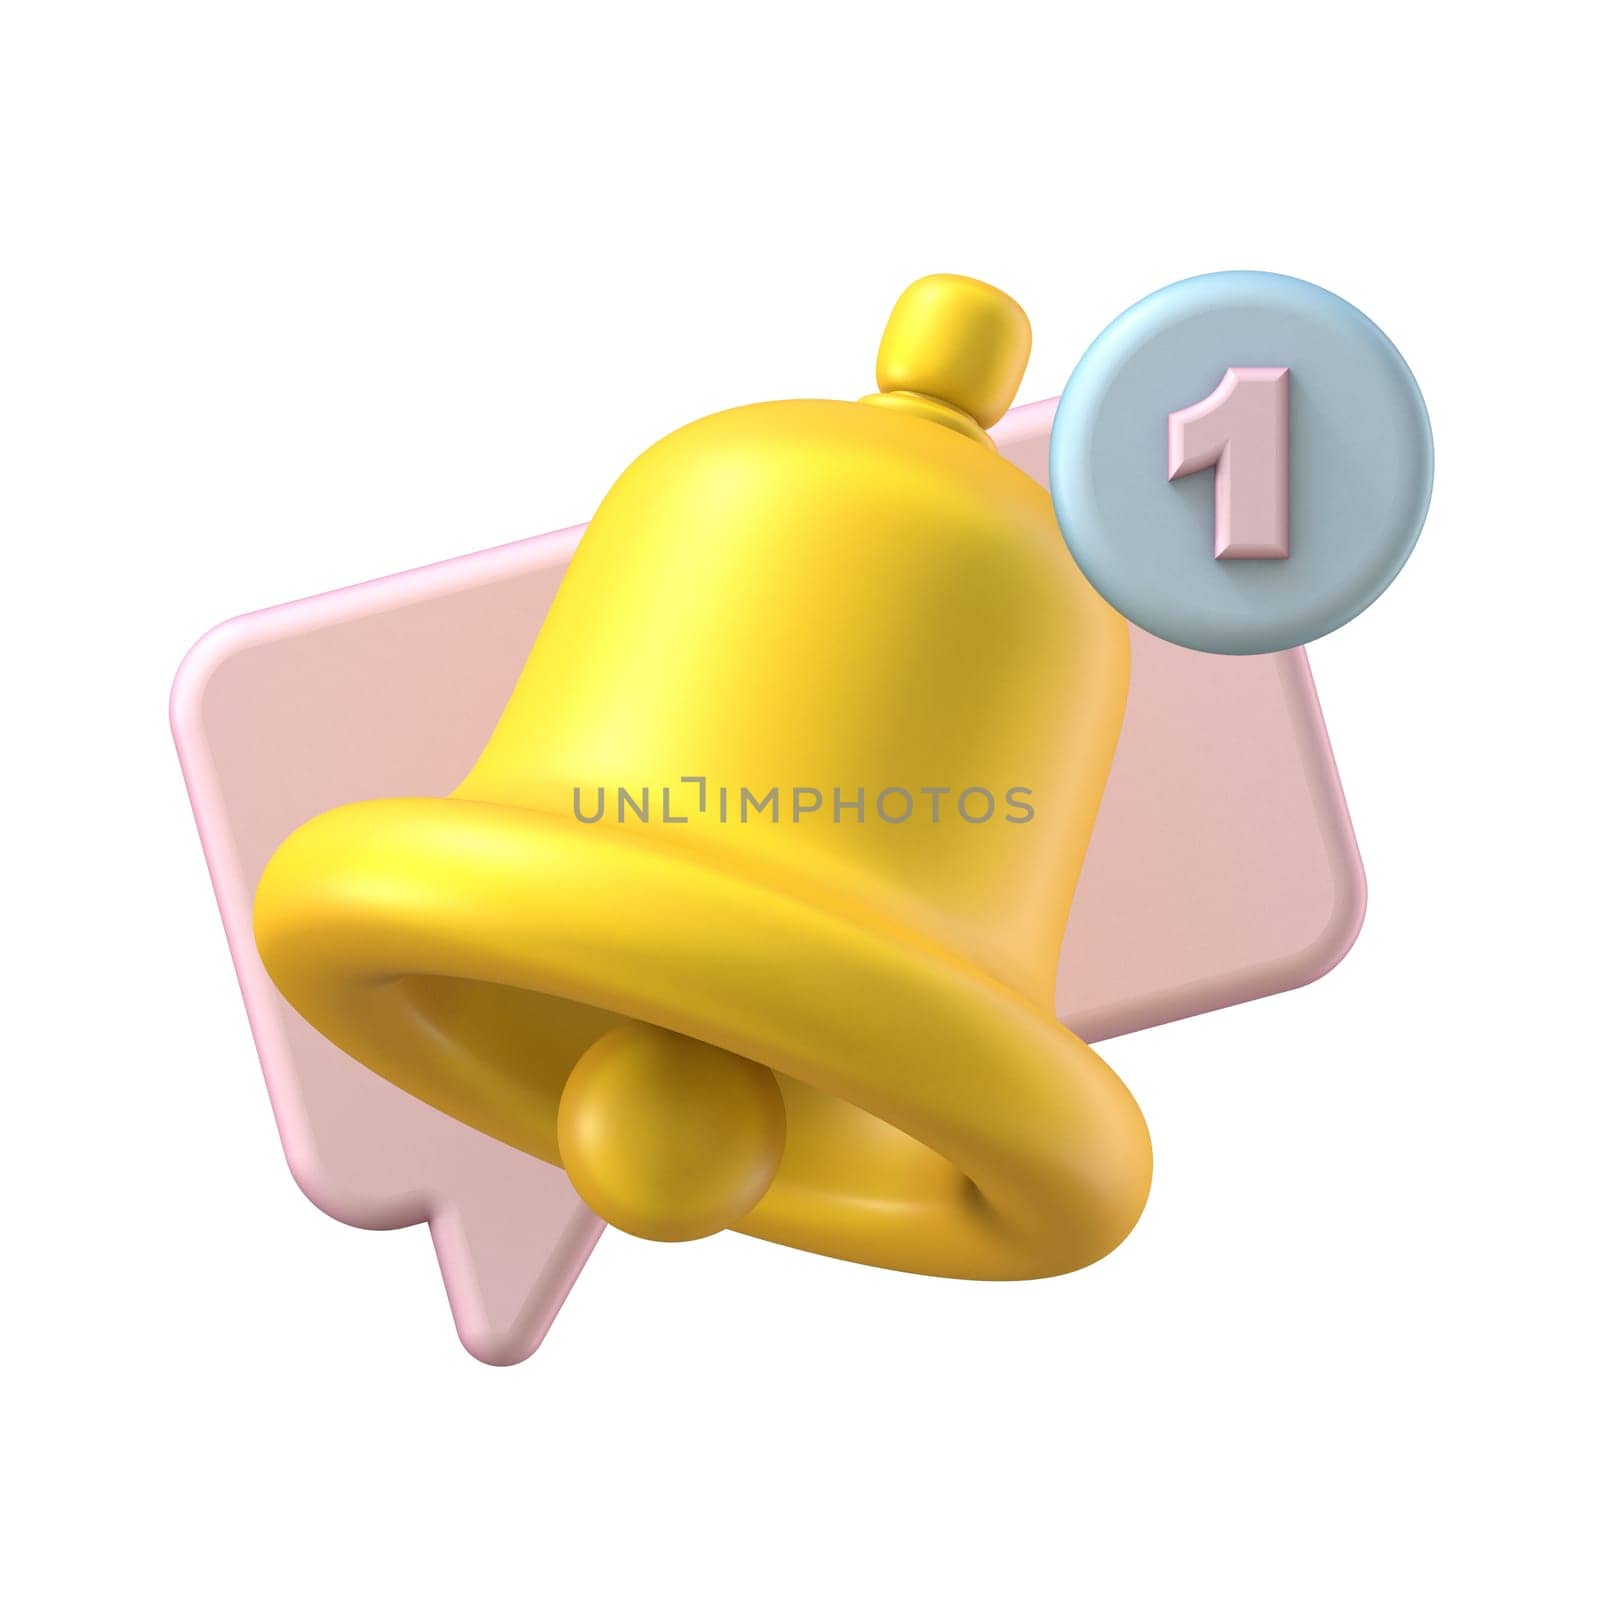 Notification bell with speech bubble 3D rendering illustration isolated on white background